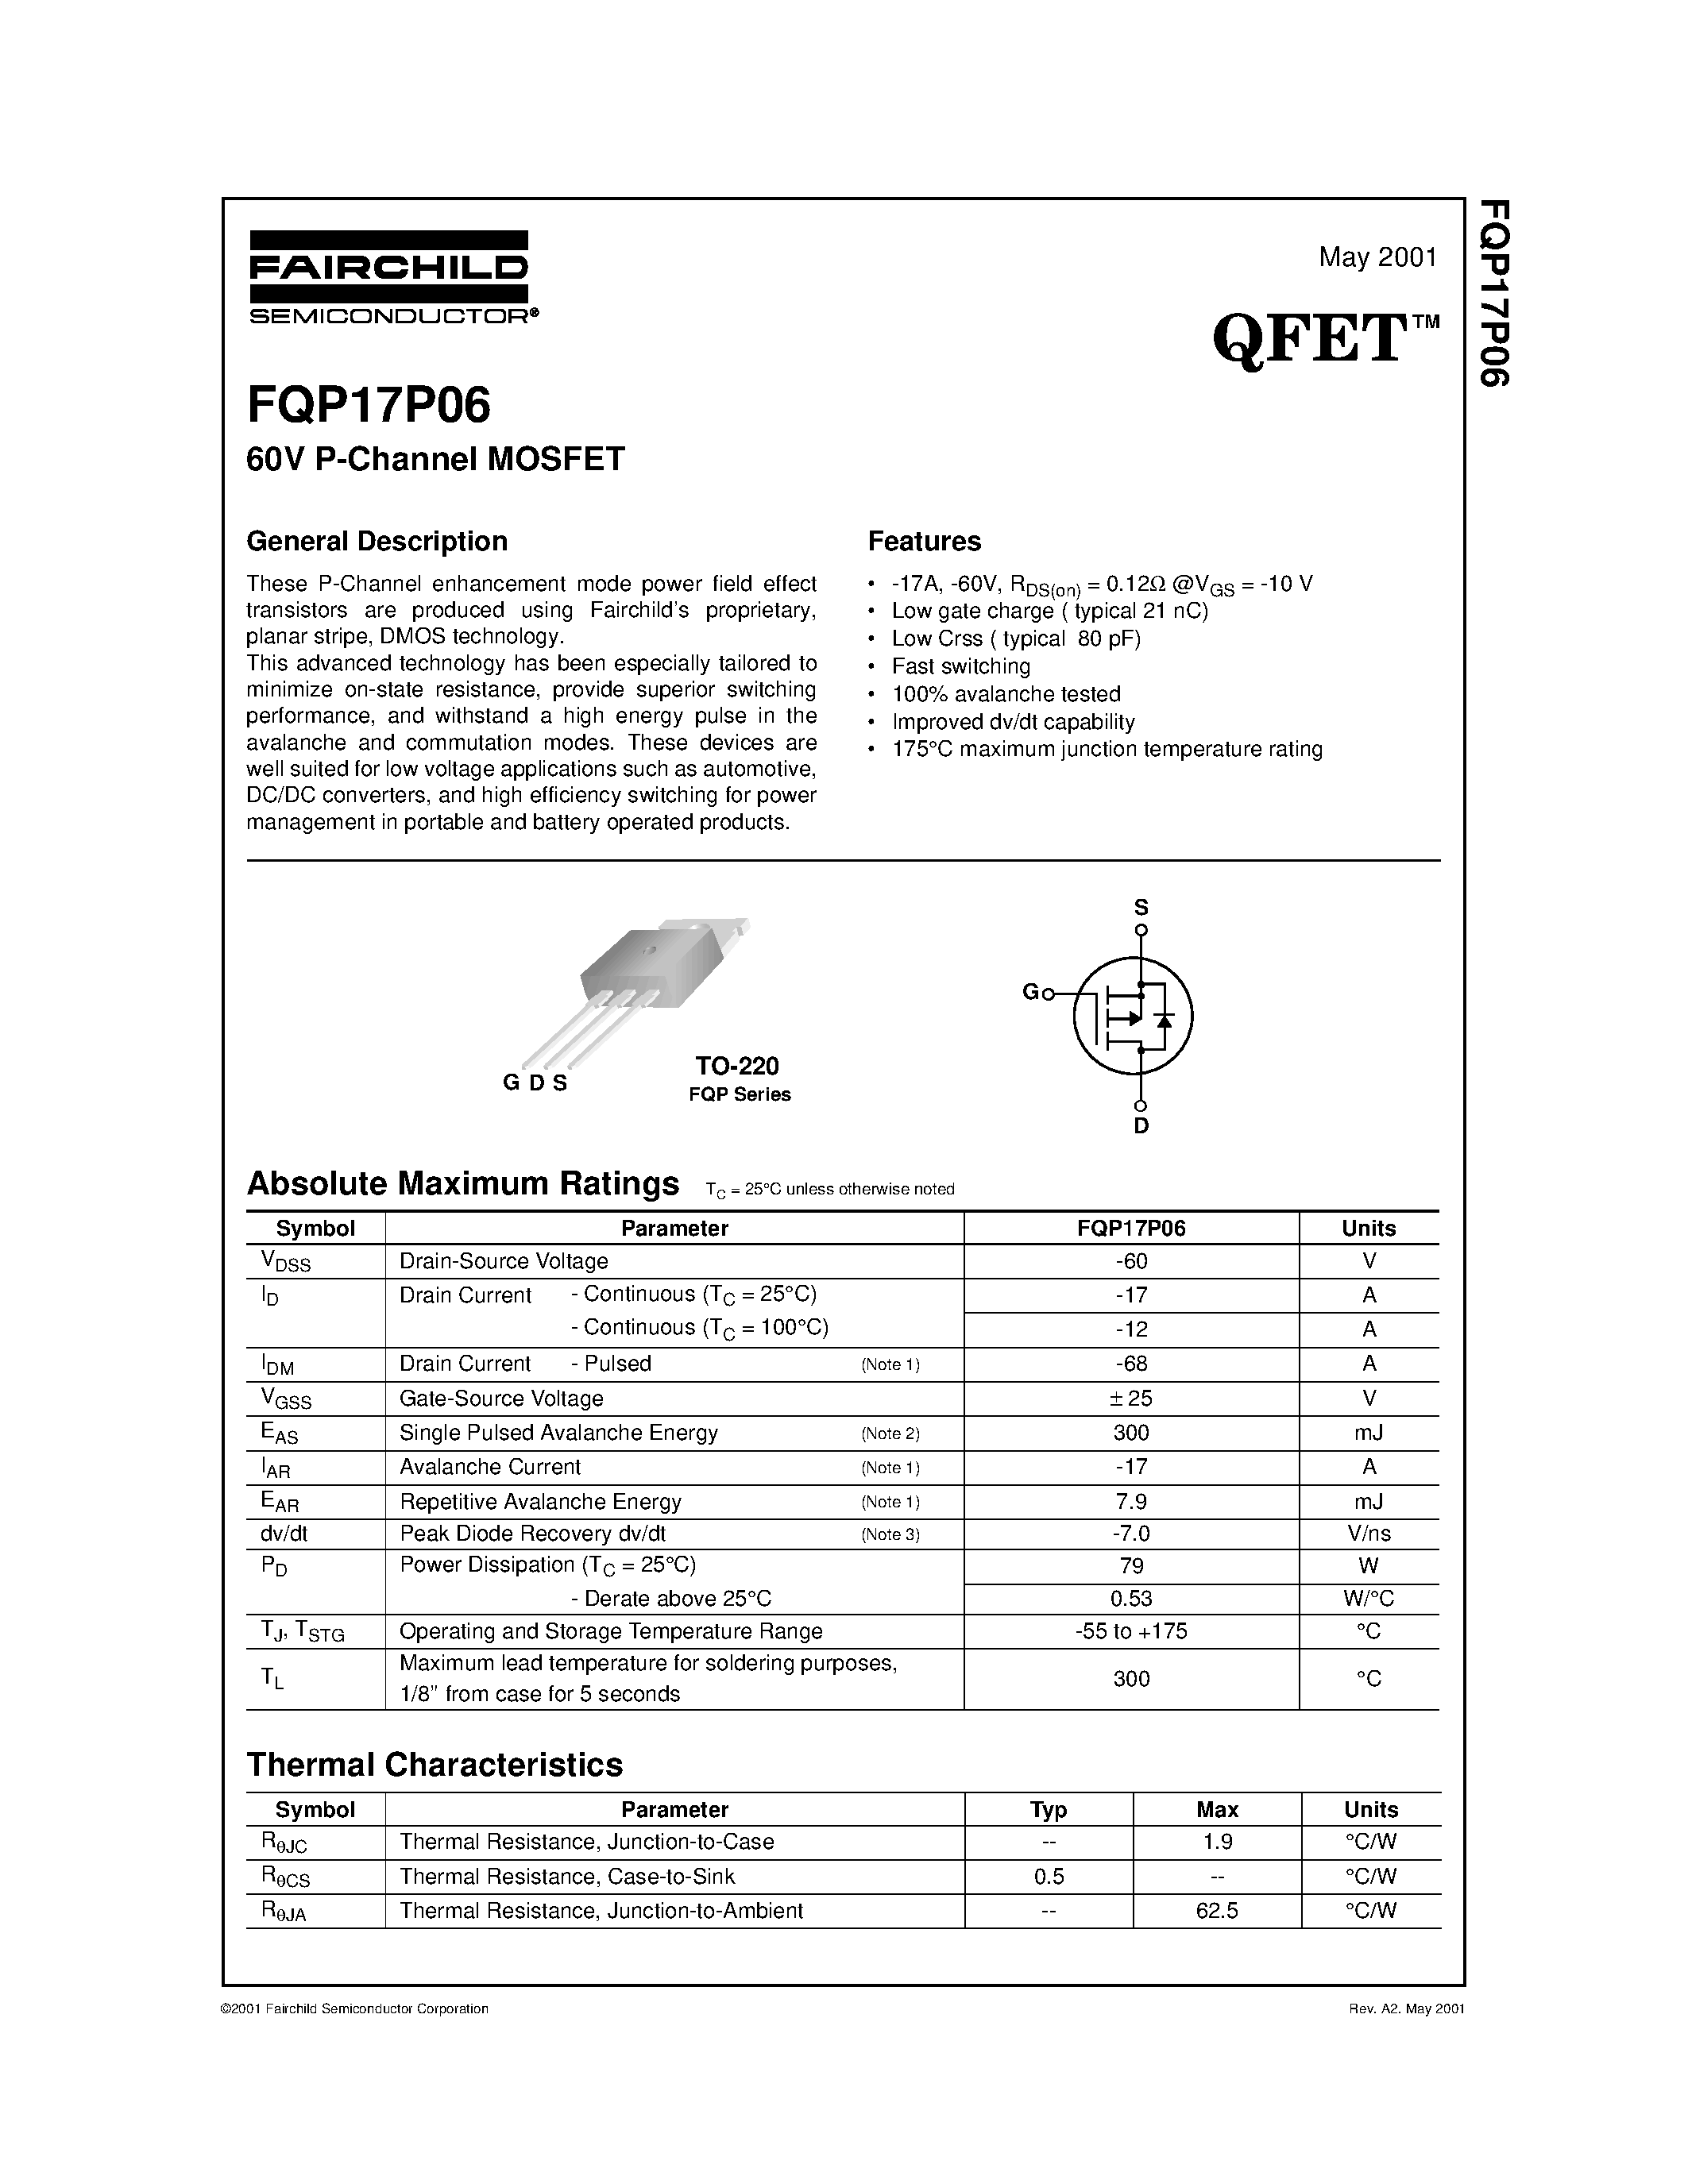 Datasheet FQP17P06 - 60V P-Channel MOSFET page 1